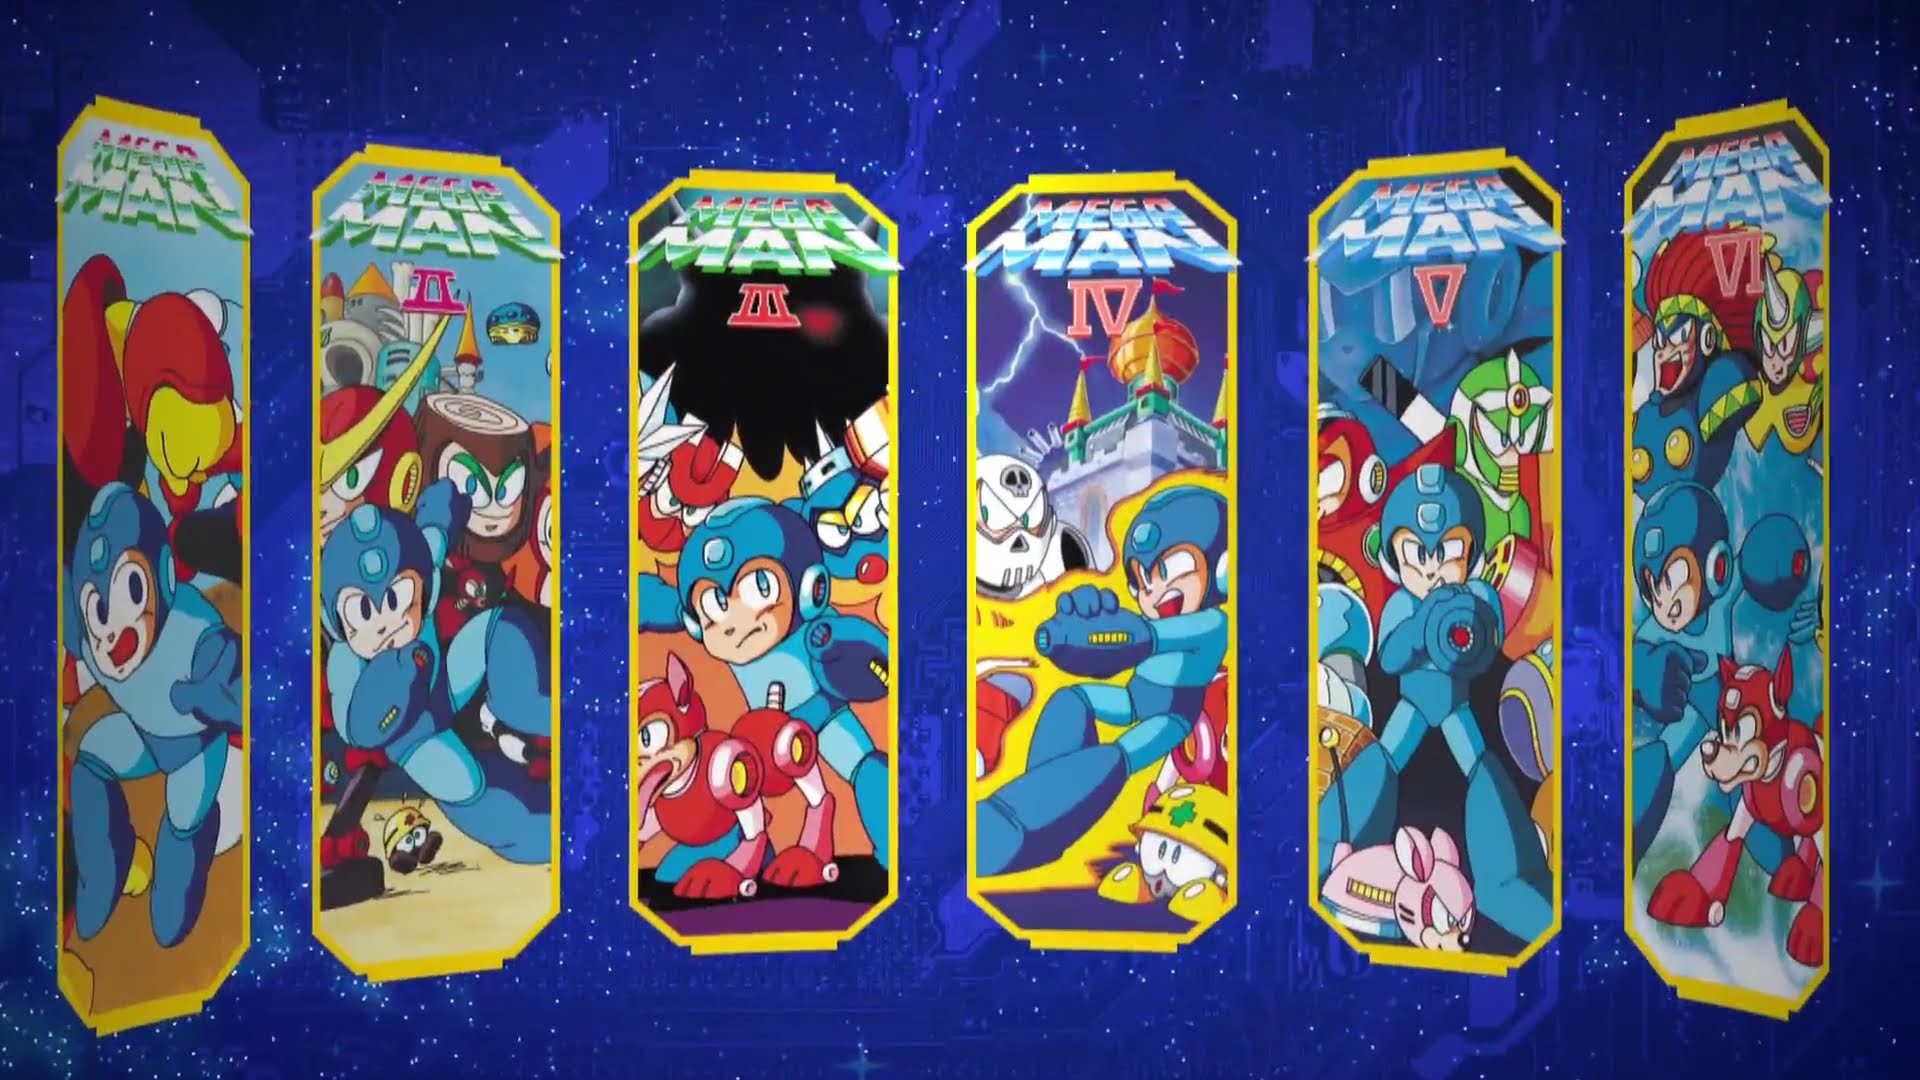 View, download, comment, and rate this Mega Man Legacy Collection Wallpaper